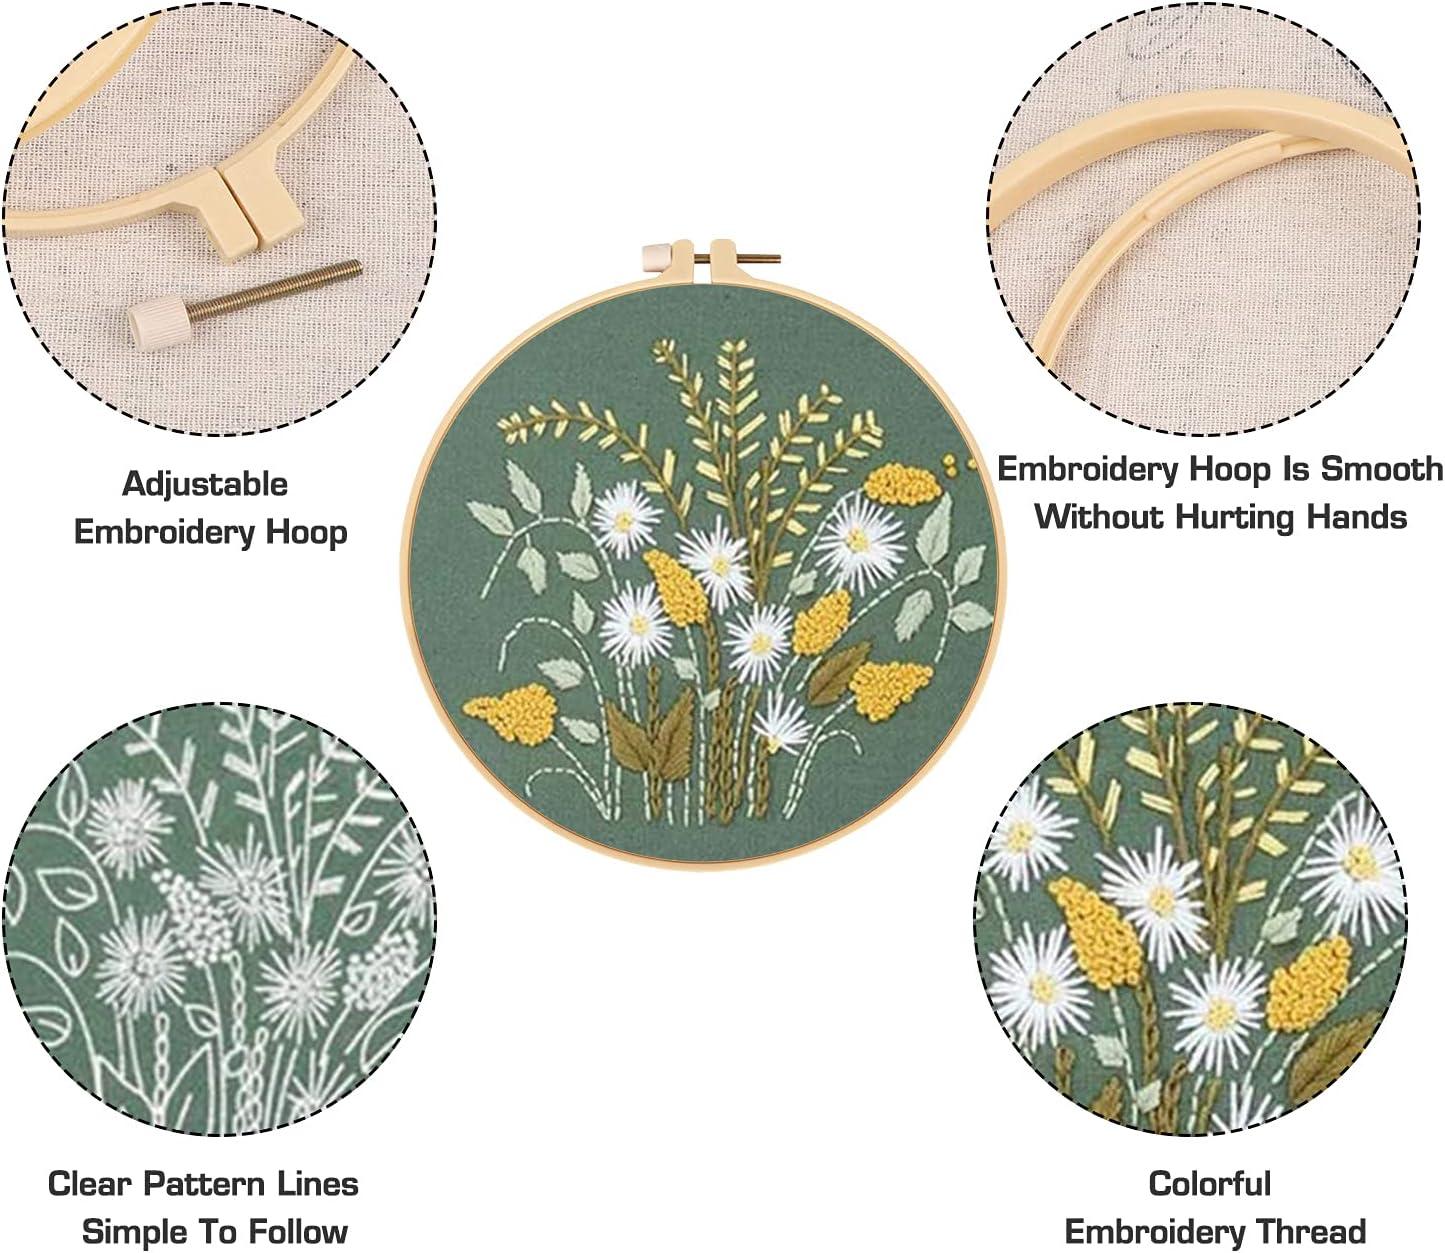 Nuberlic Embroidery Kit, Cross Stitch Kits Embroidery Kit for Beginners Adults Needlepoint with Embroidery Hoop Cloth Needles Threads